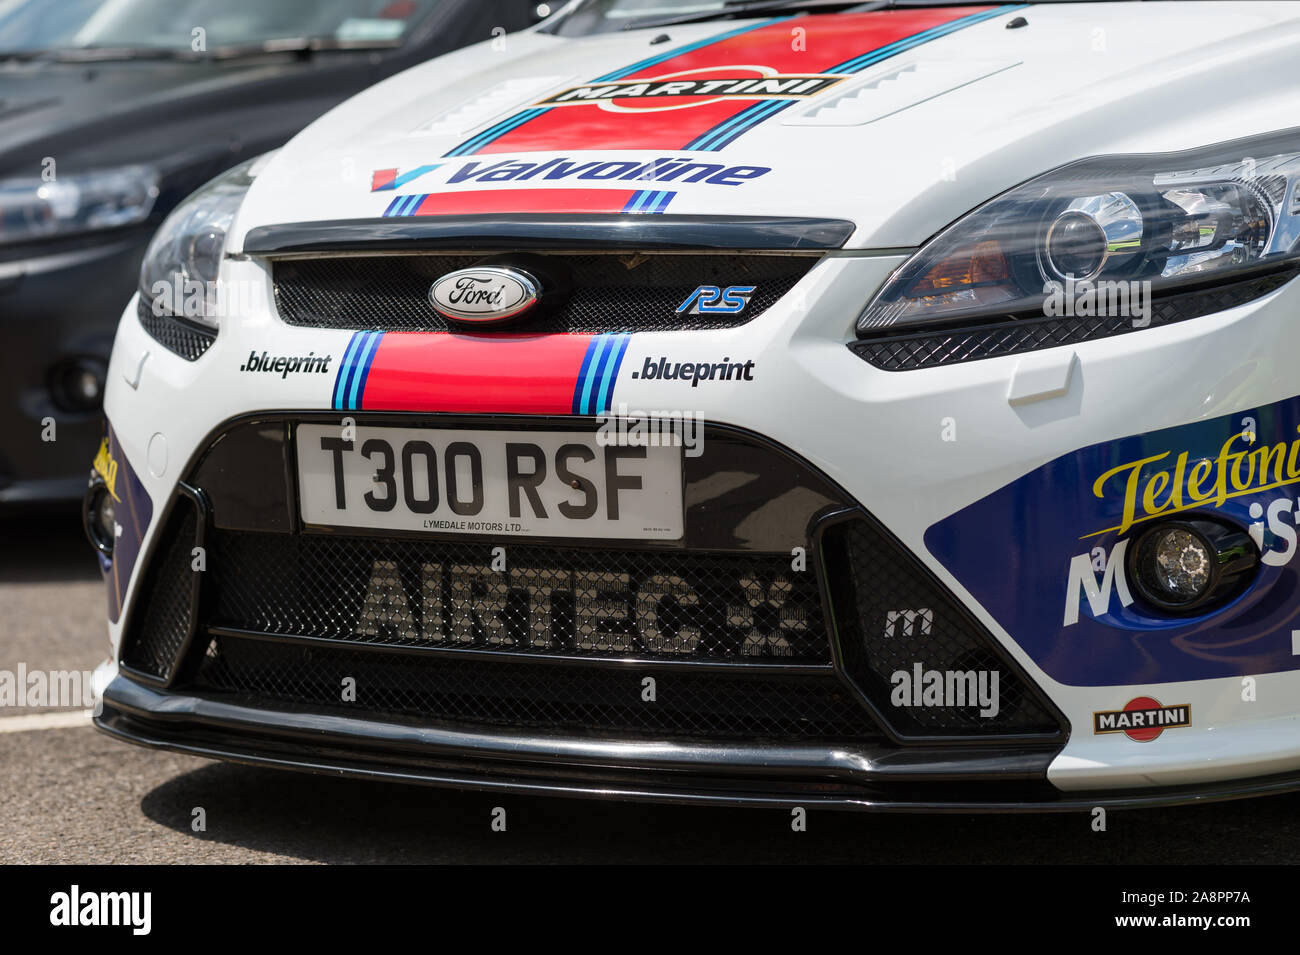 Ford Focus rally car at the Ford factory in Dunton, U.K. Stock Photo